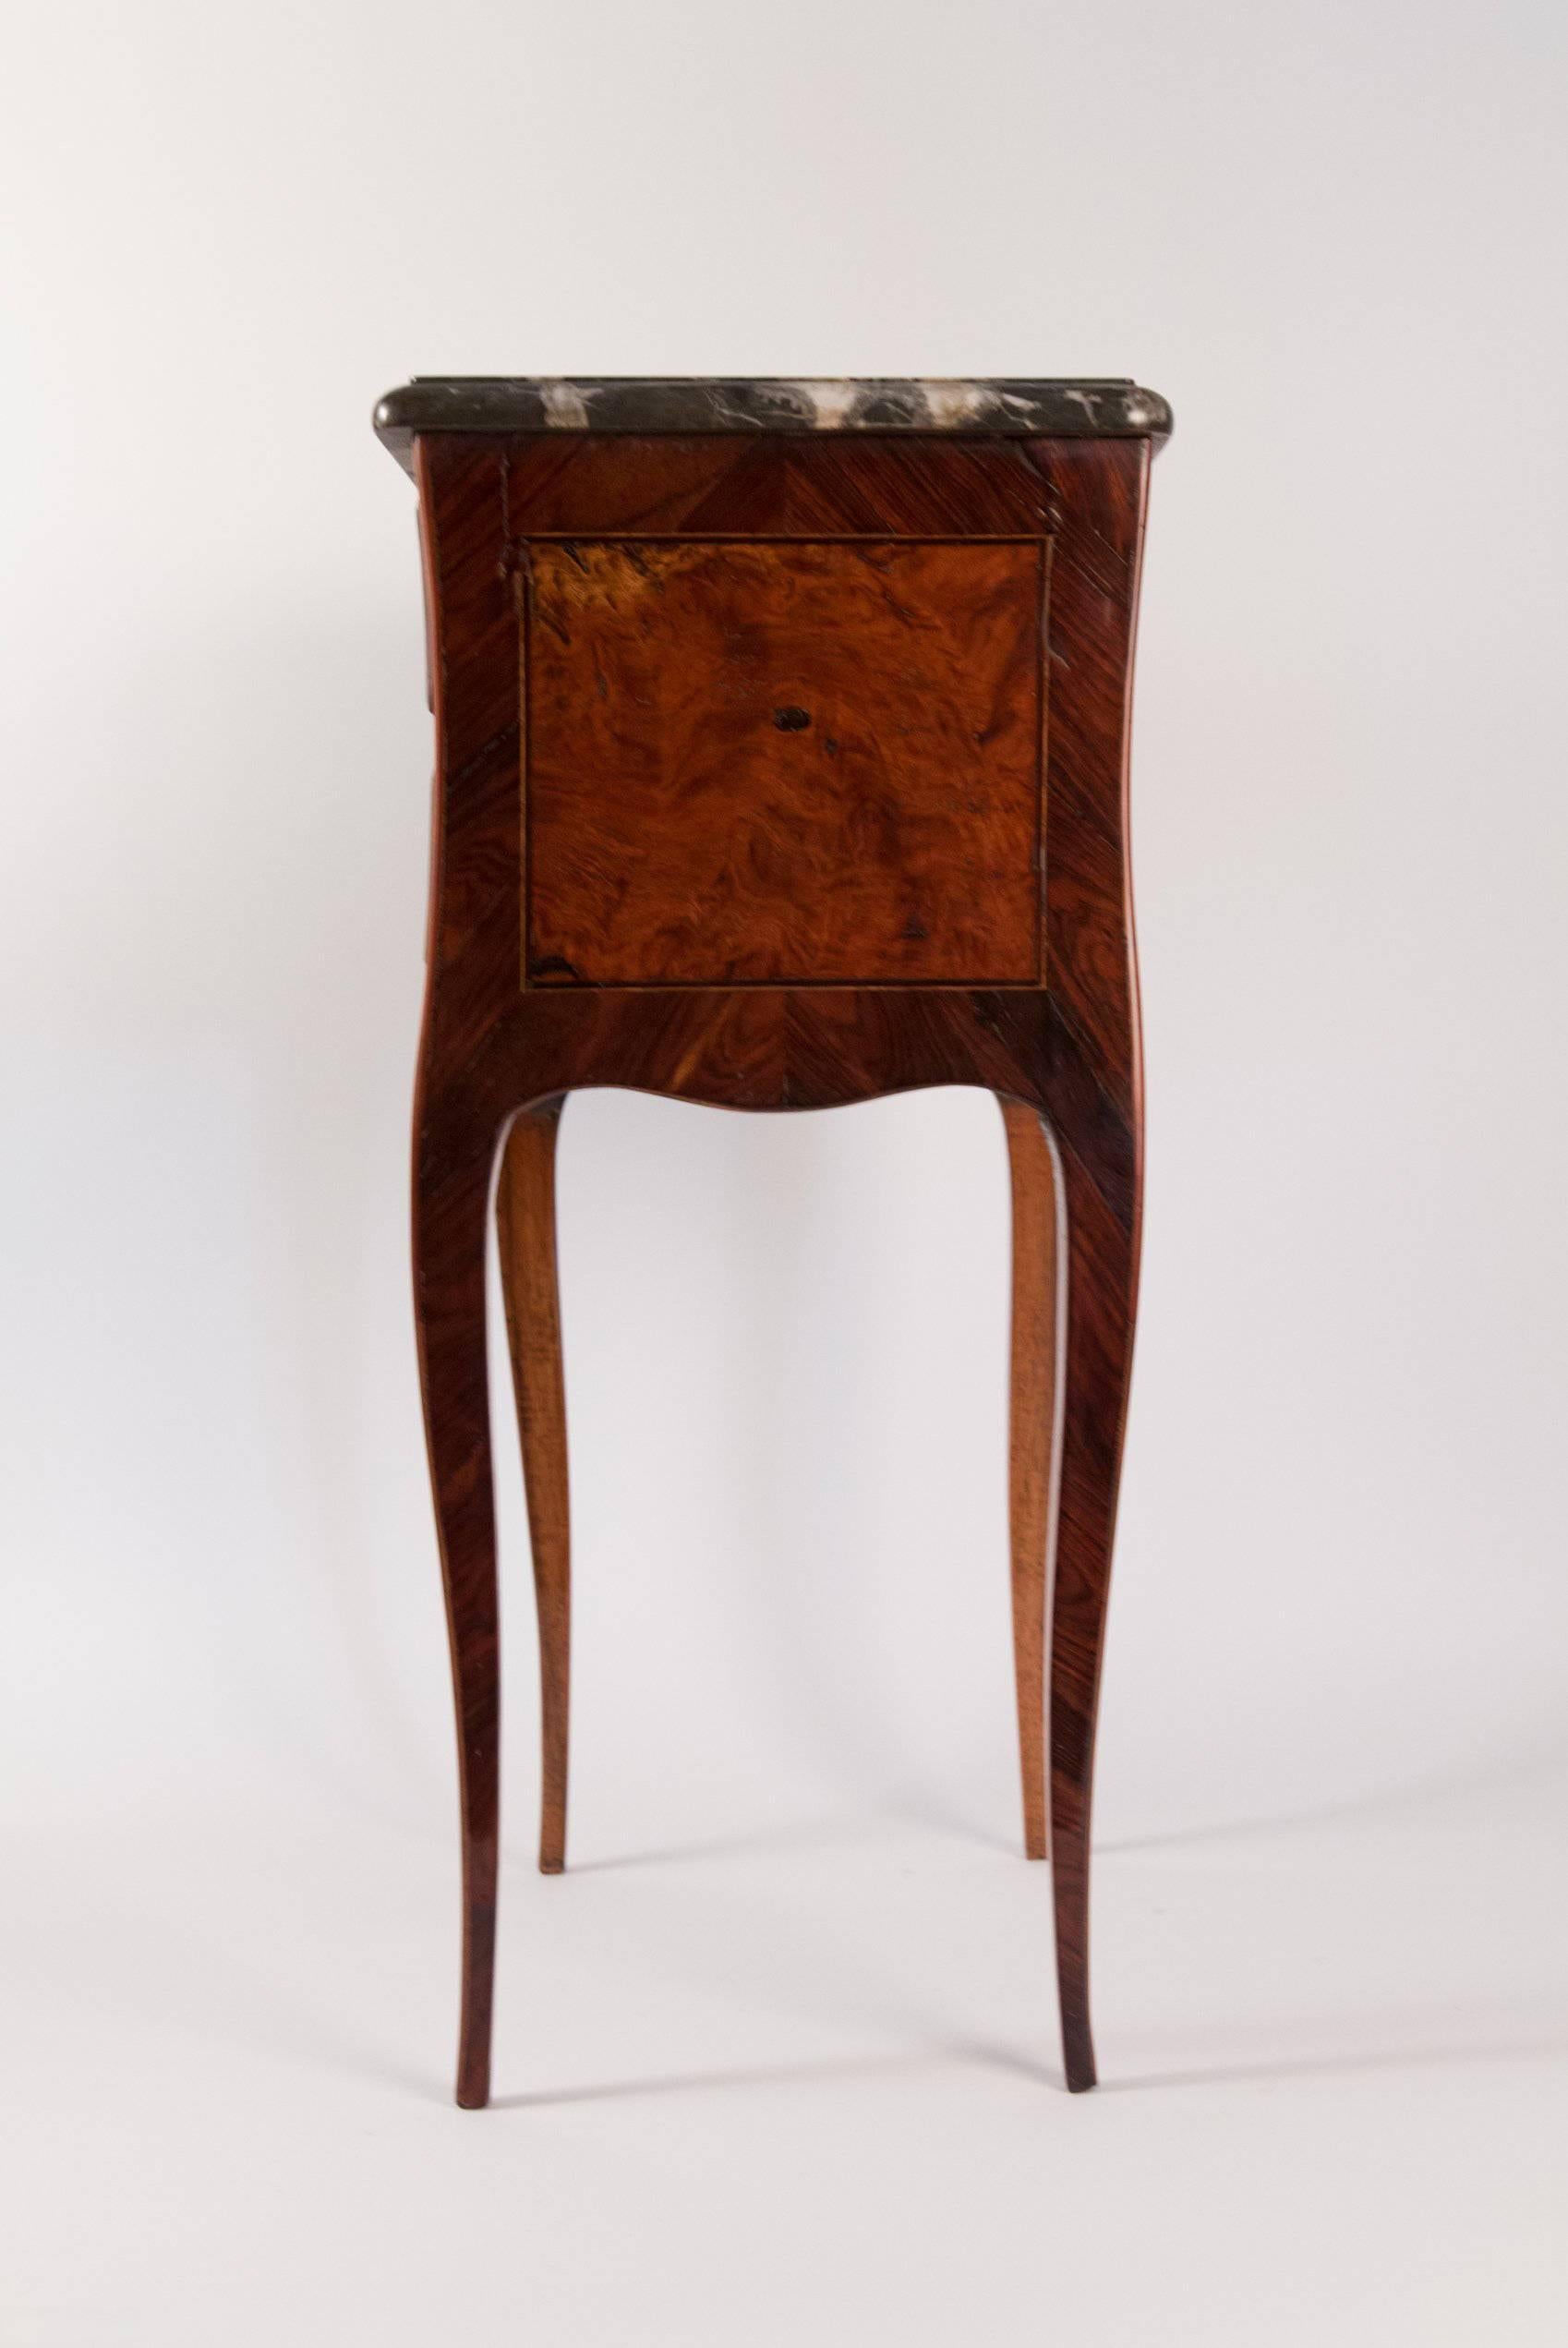 French Small Louis XV Style Serpentine Commode with Marble Top, circa 1820-1830 In Good Condition For Sale In Saint Ouen, FR